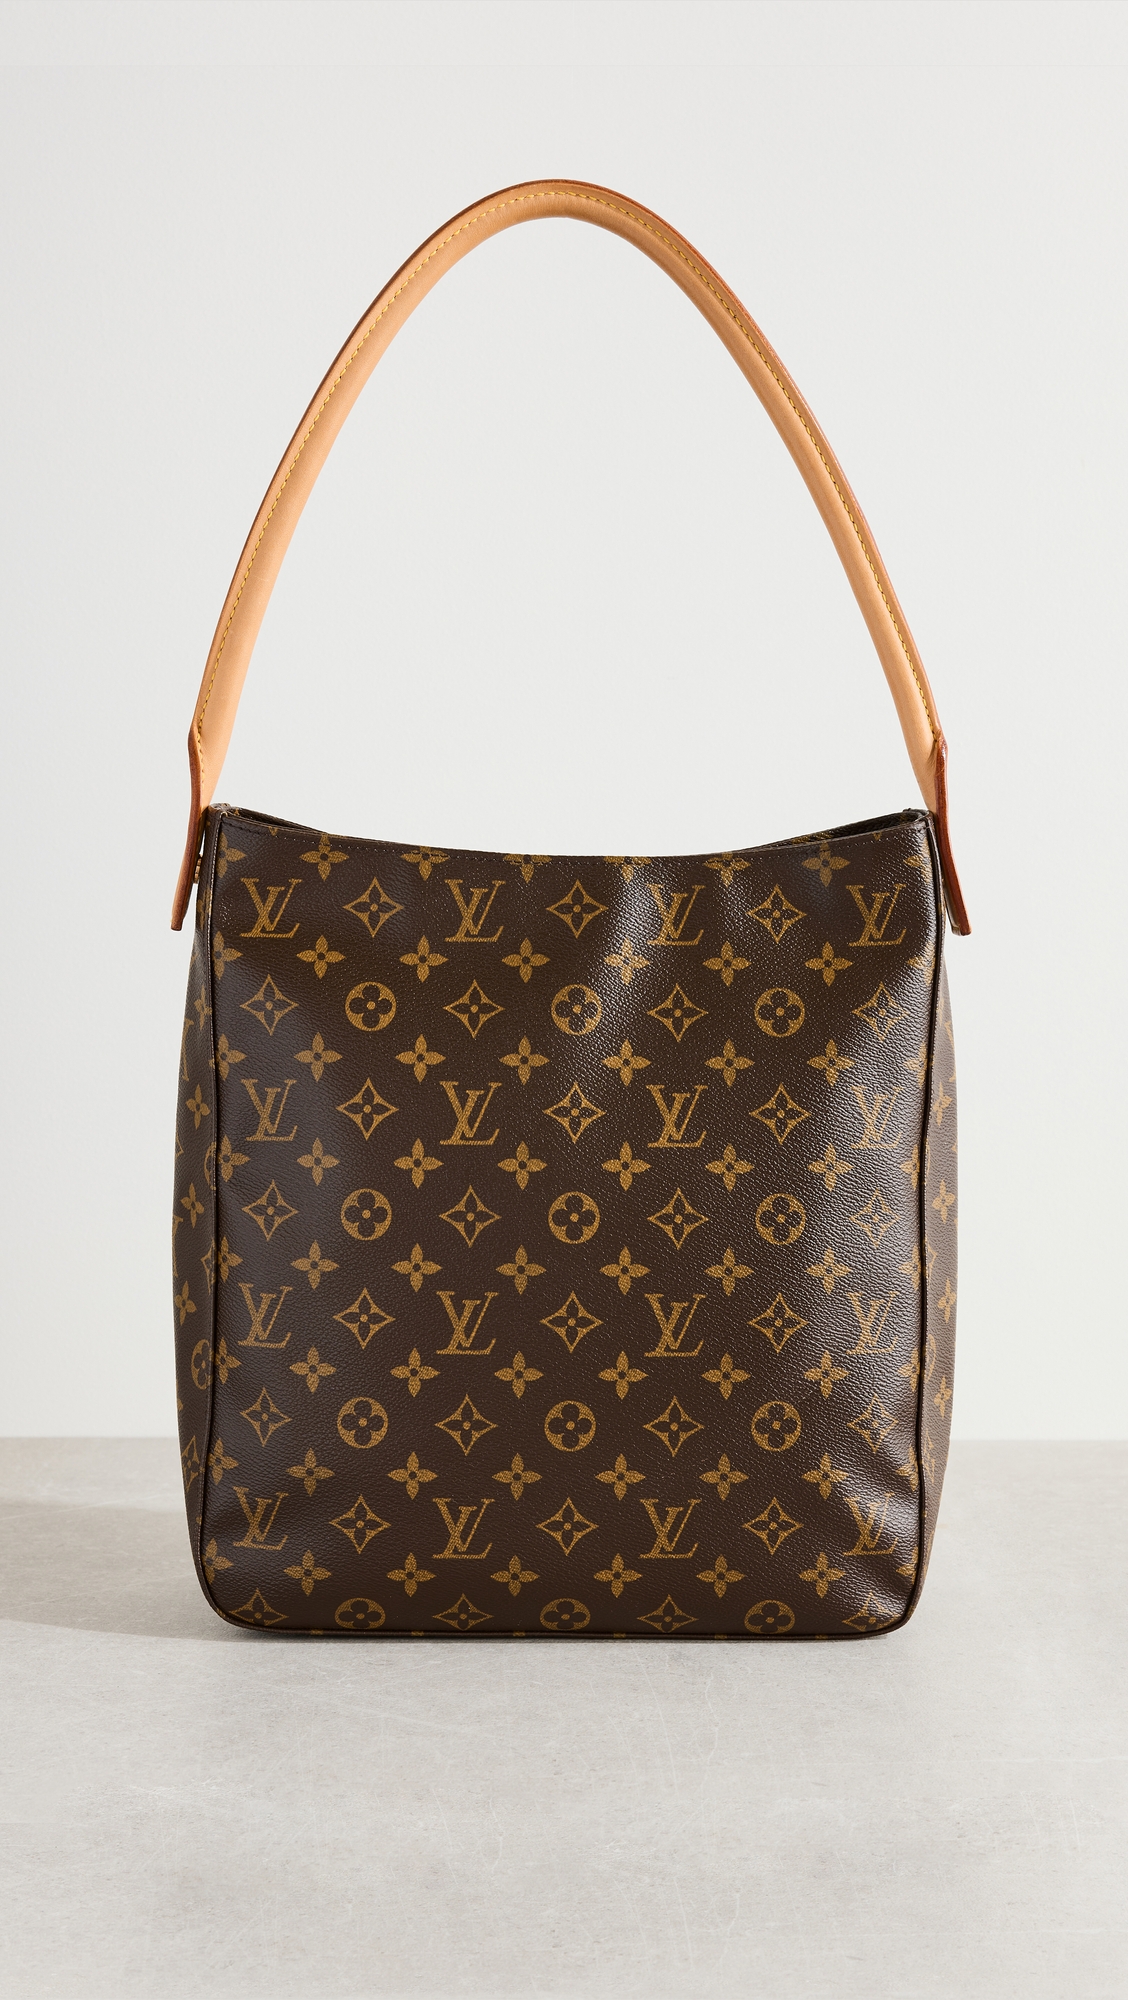 12 Most Iconic Louis Vuitton Bag Styles That You'd Want to Own